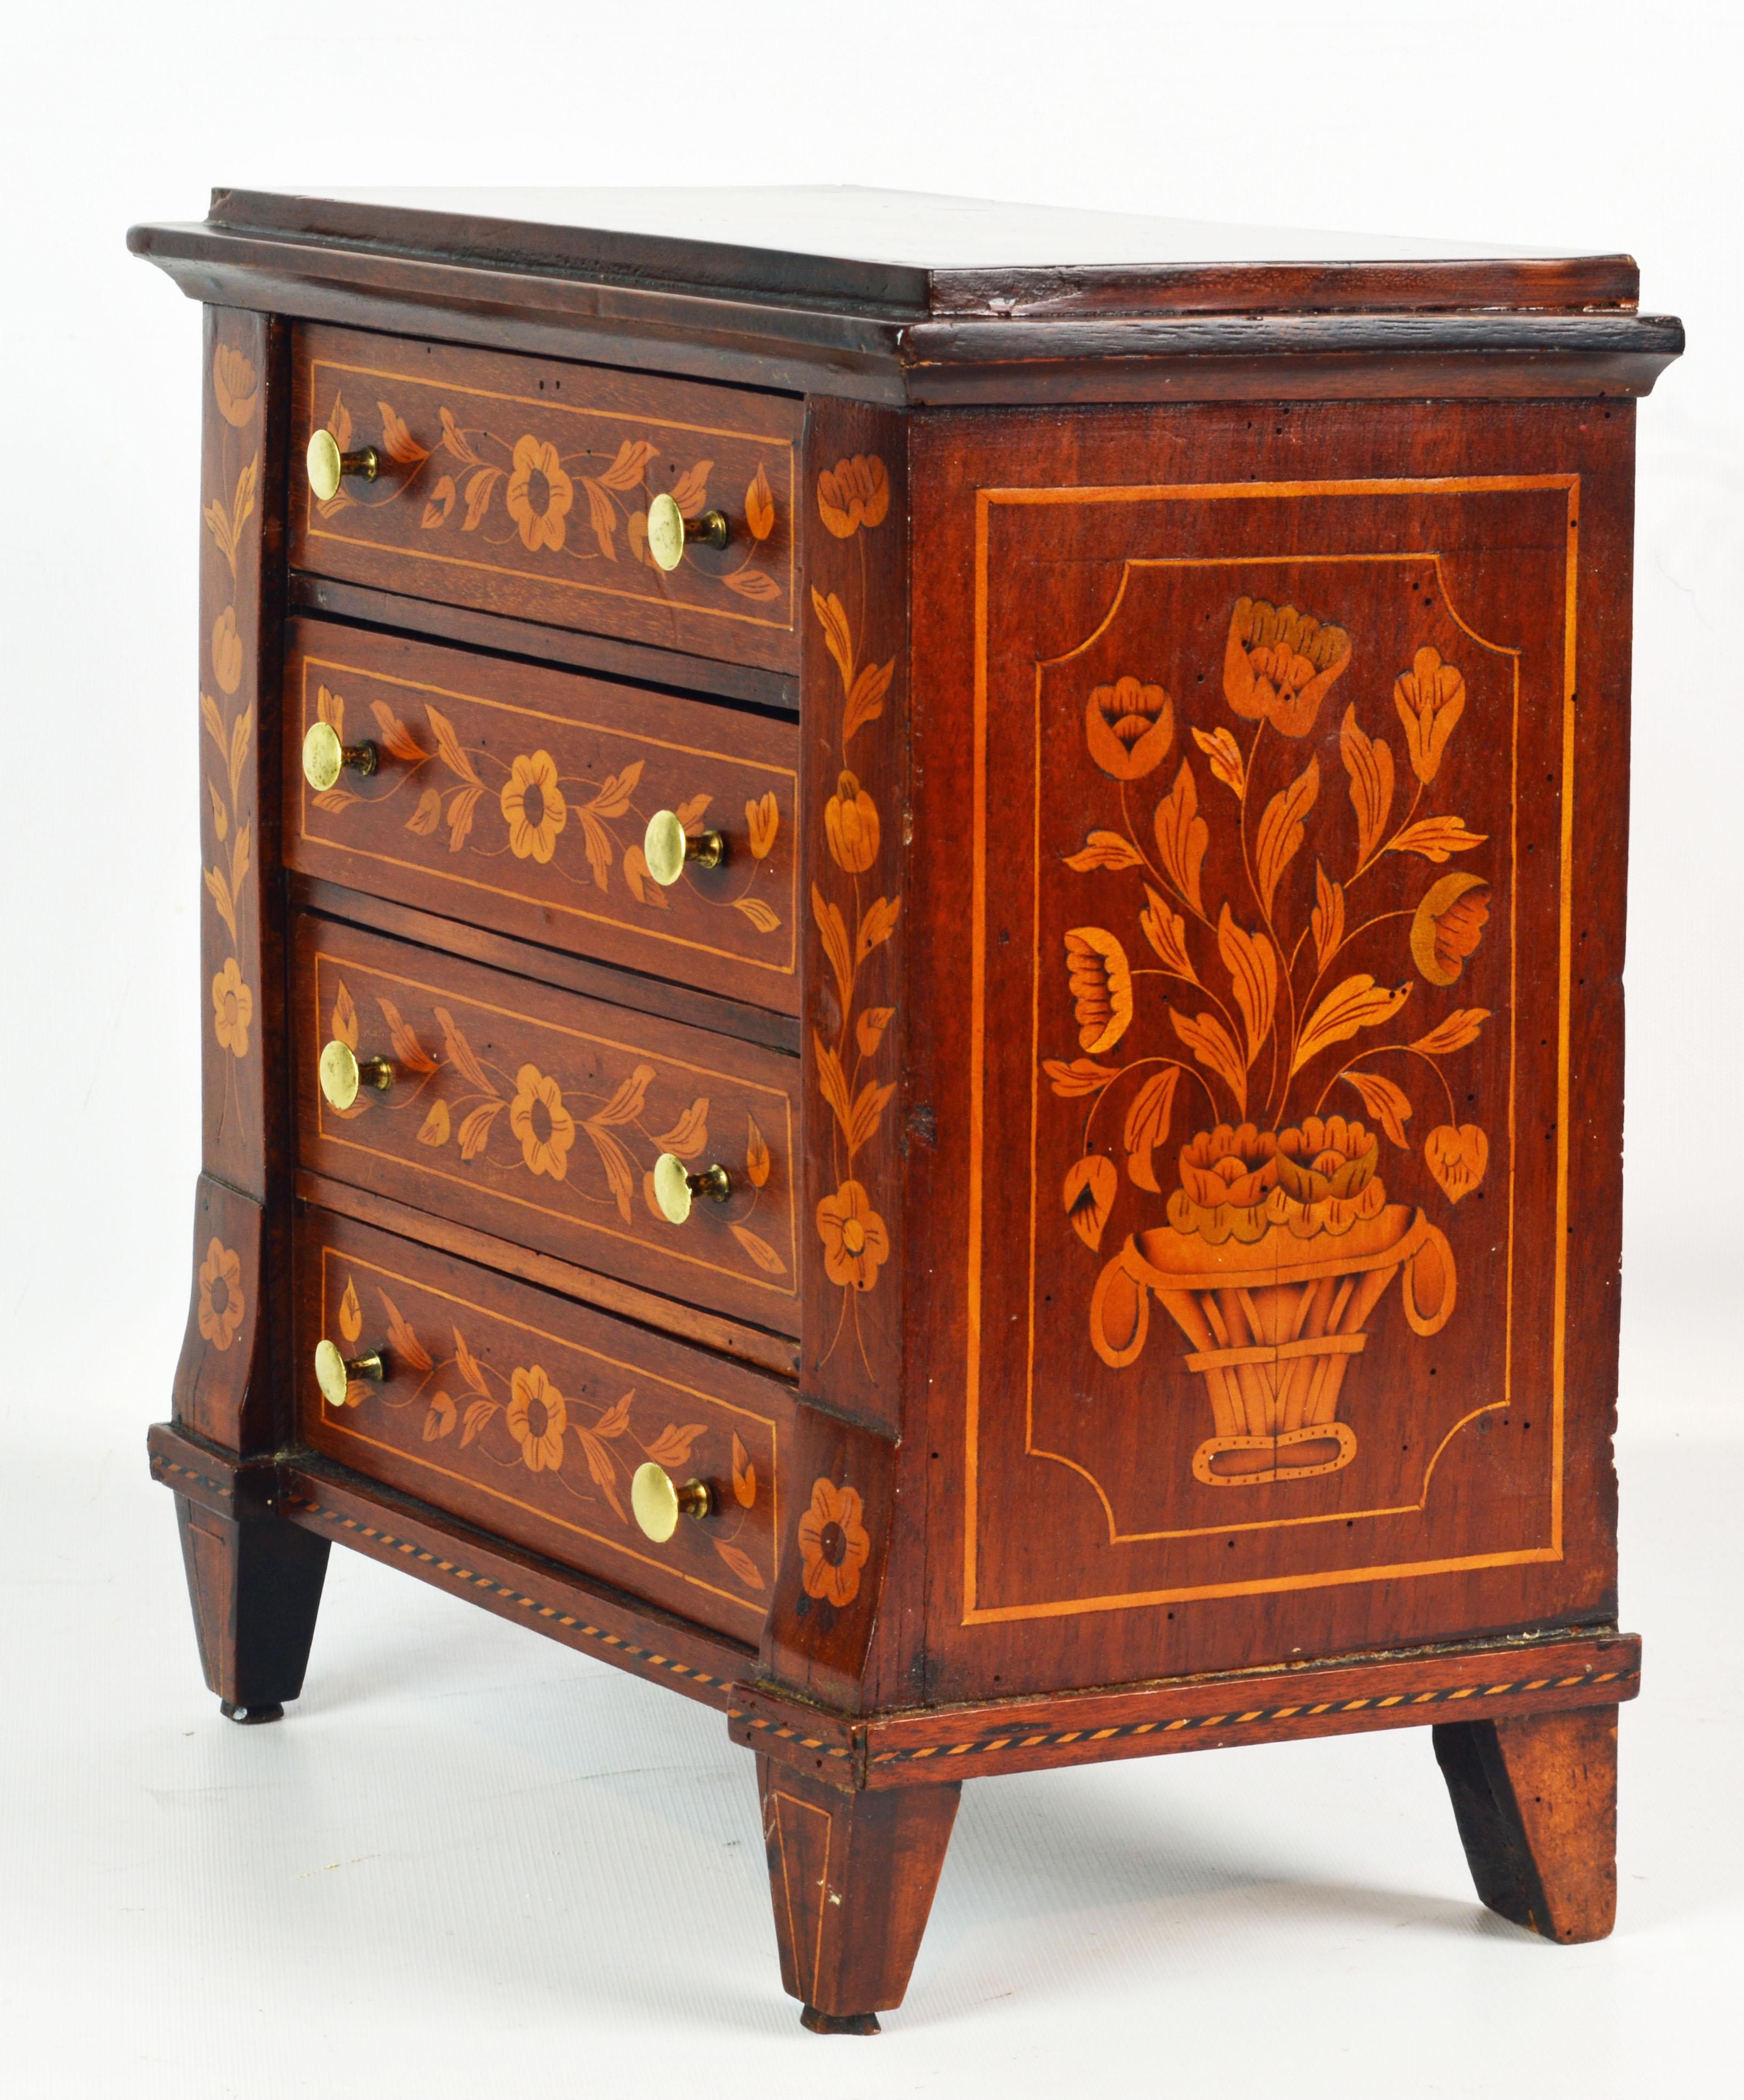 Louis XVI Italian 19th Century Richly Inlaid Miniature Chest of Drawers or Jewelry Chest